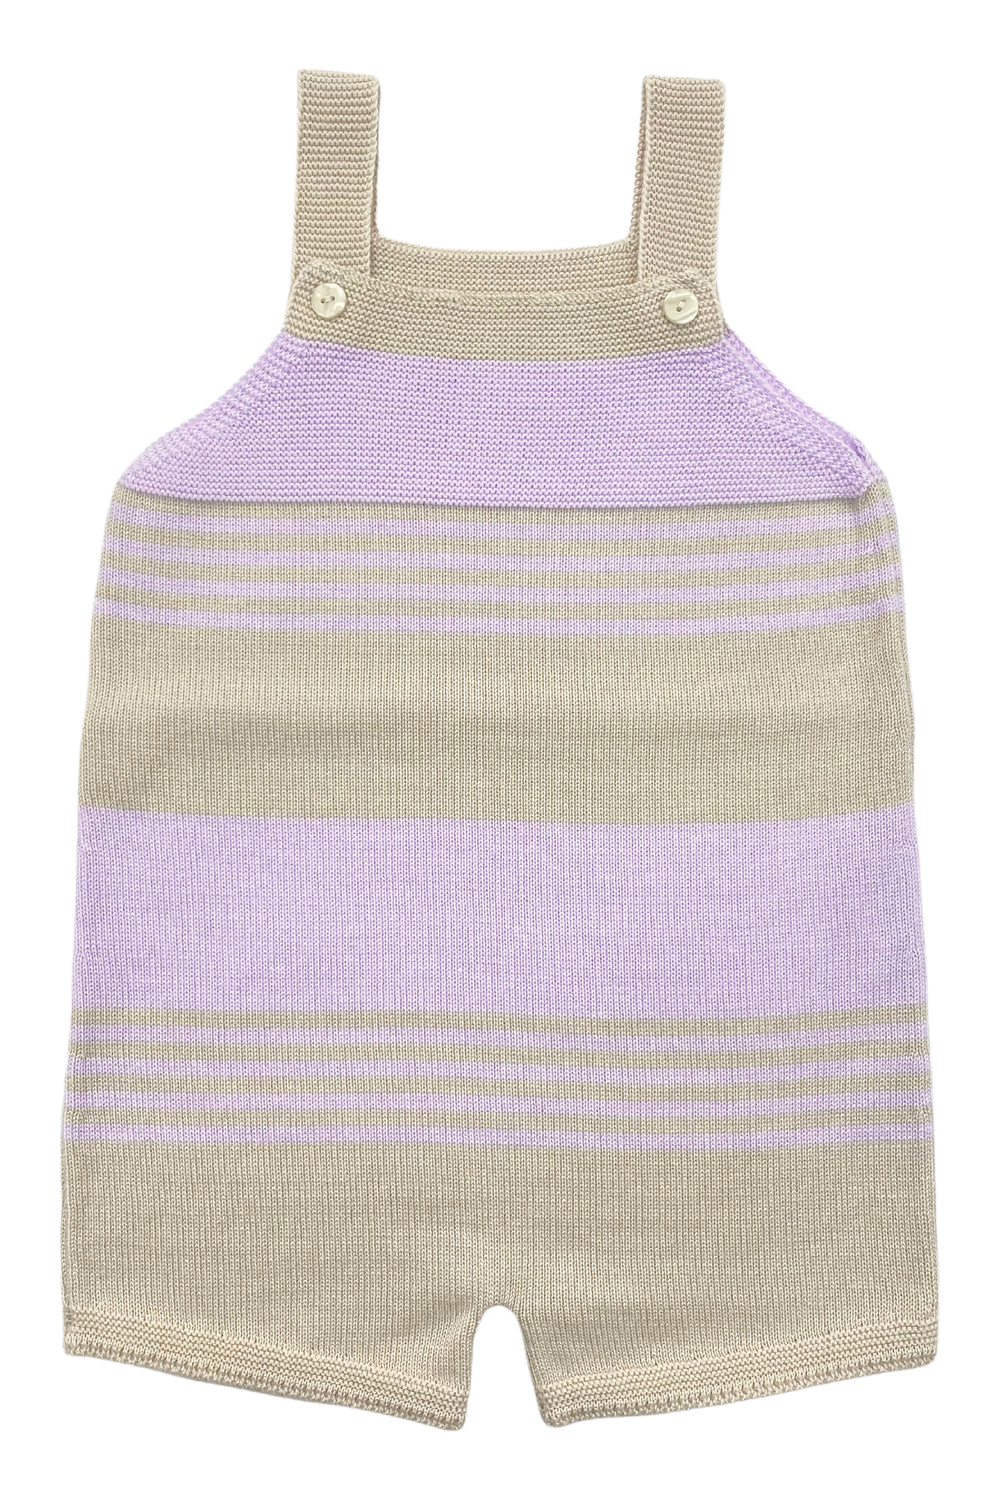 Granlei "Jovie" Stone & Lilac Stripe Knit Dungarees | iphoneandroidapplications